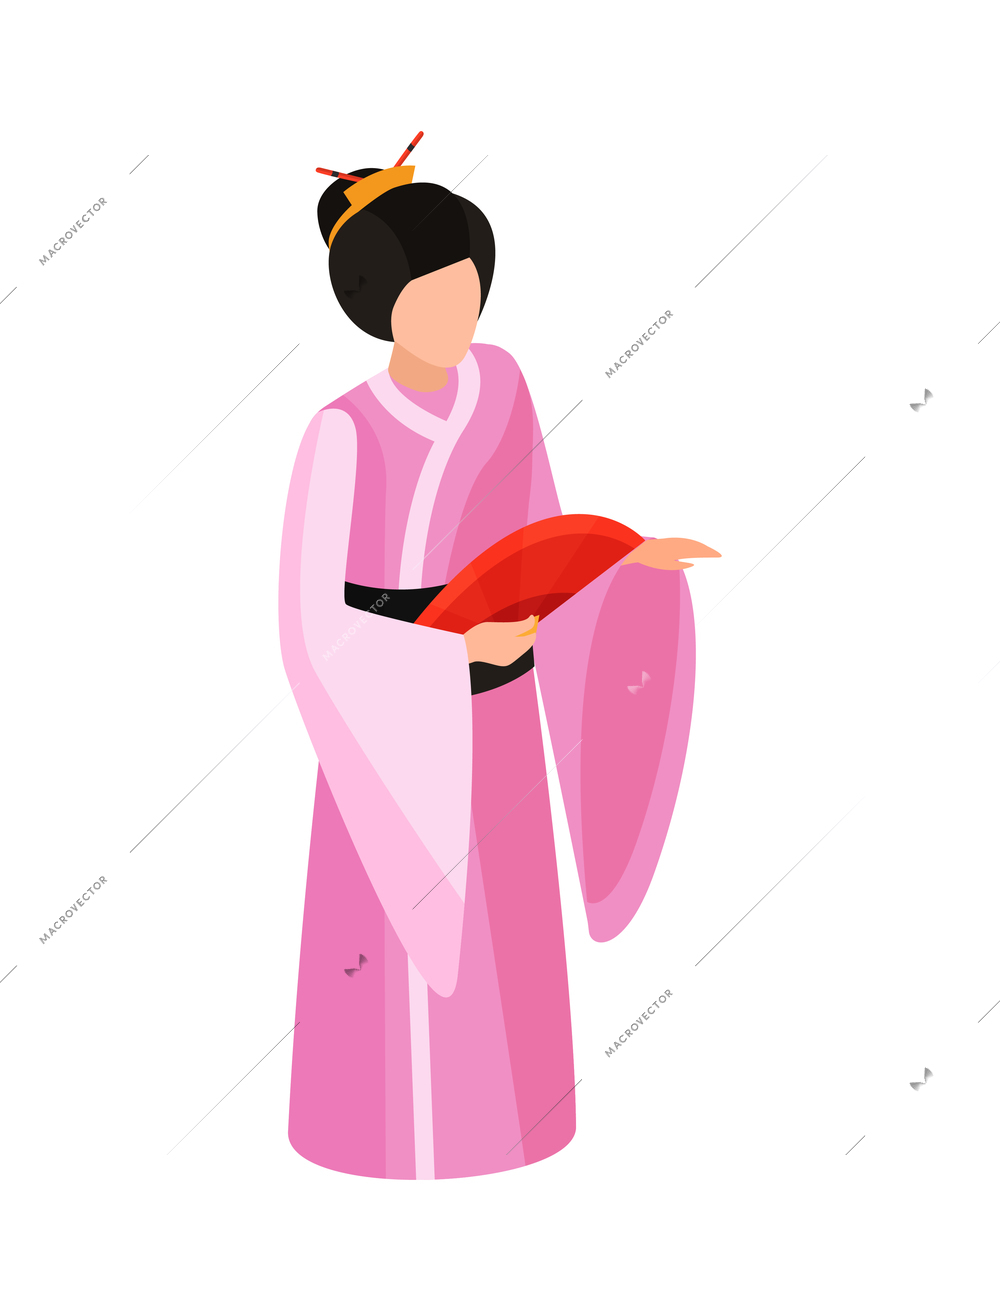 Isometric japan composition with isolated human character of traditional japanese woman vector illustration